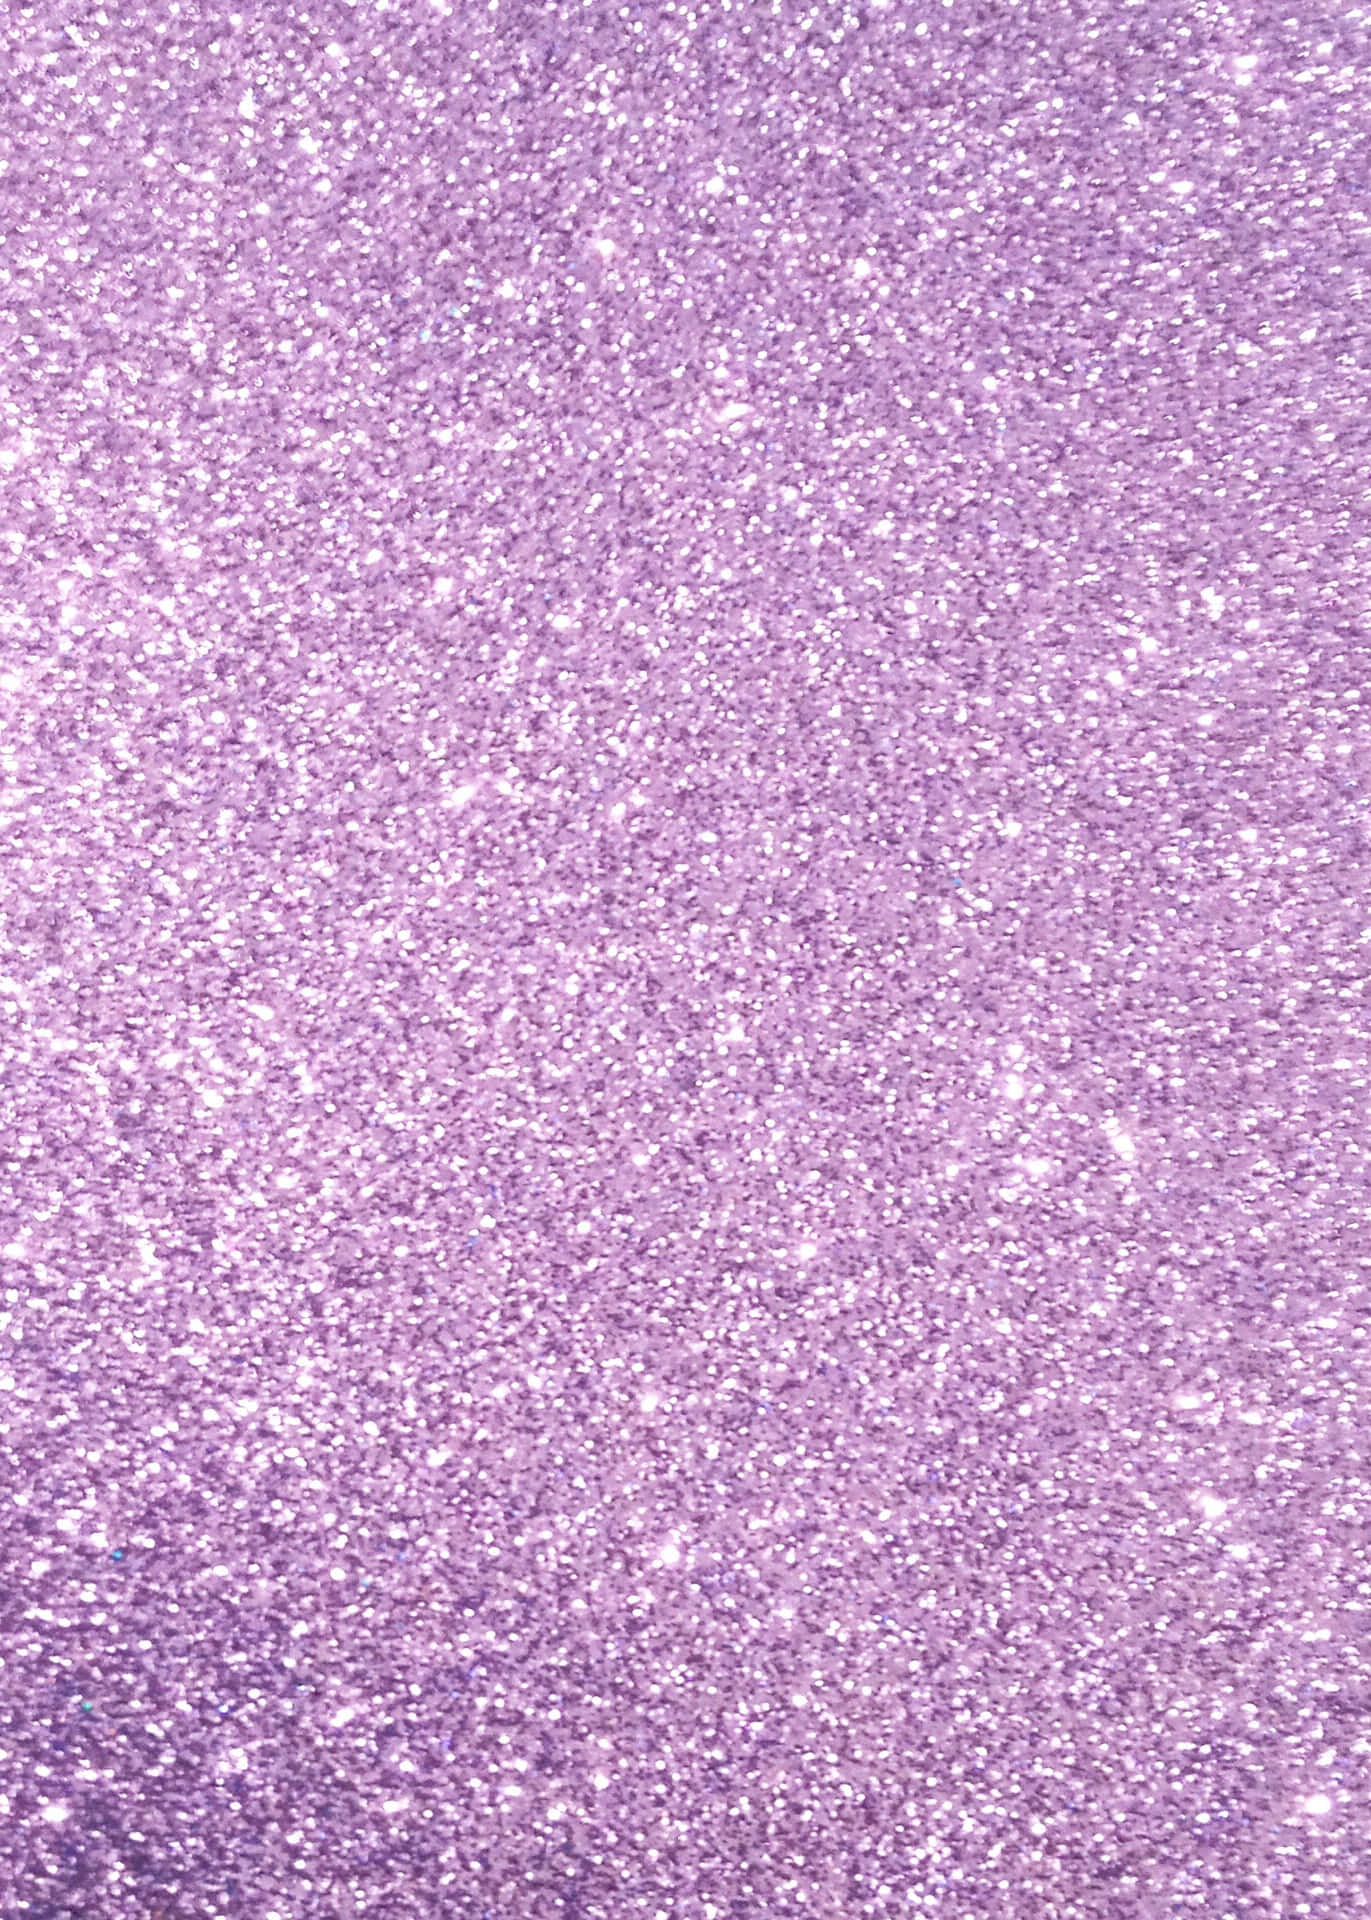 Shine Brightly With This Light Purple Glitter Background